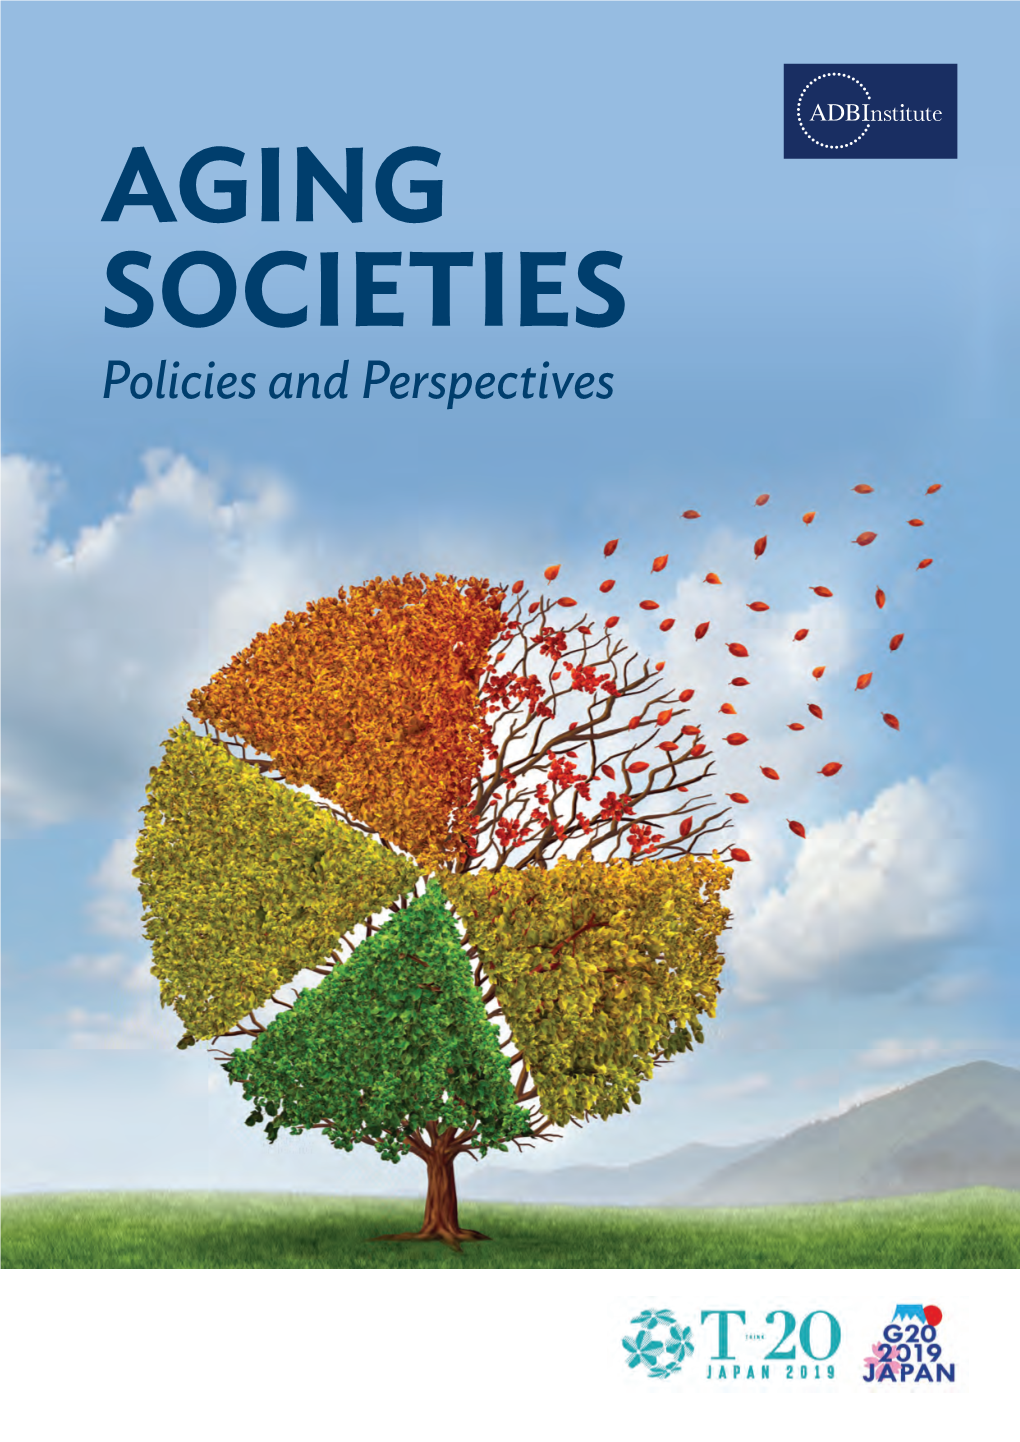 Aging Societies: Policies and Perspectives